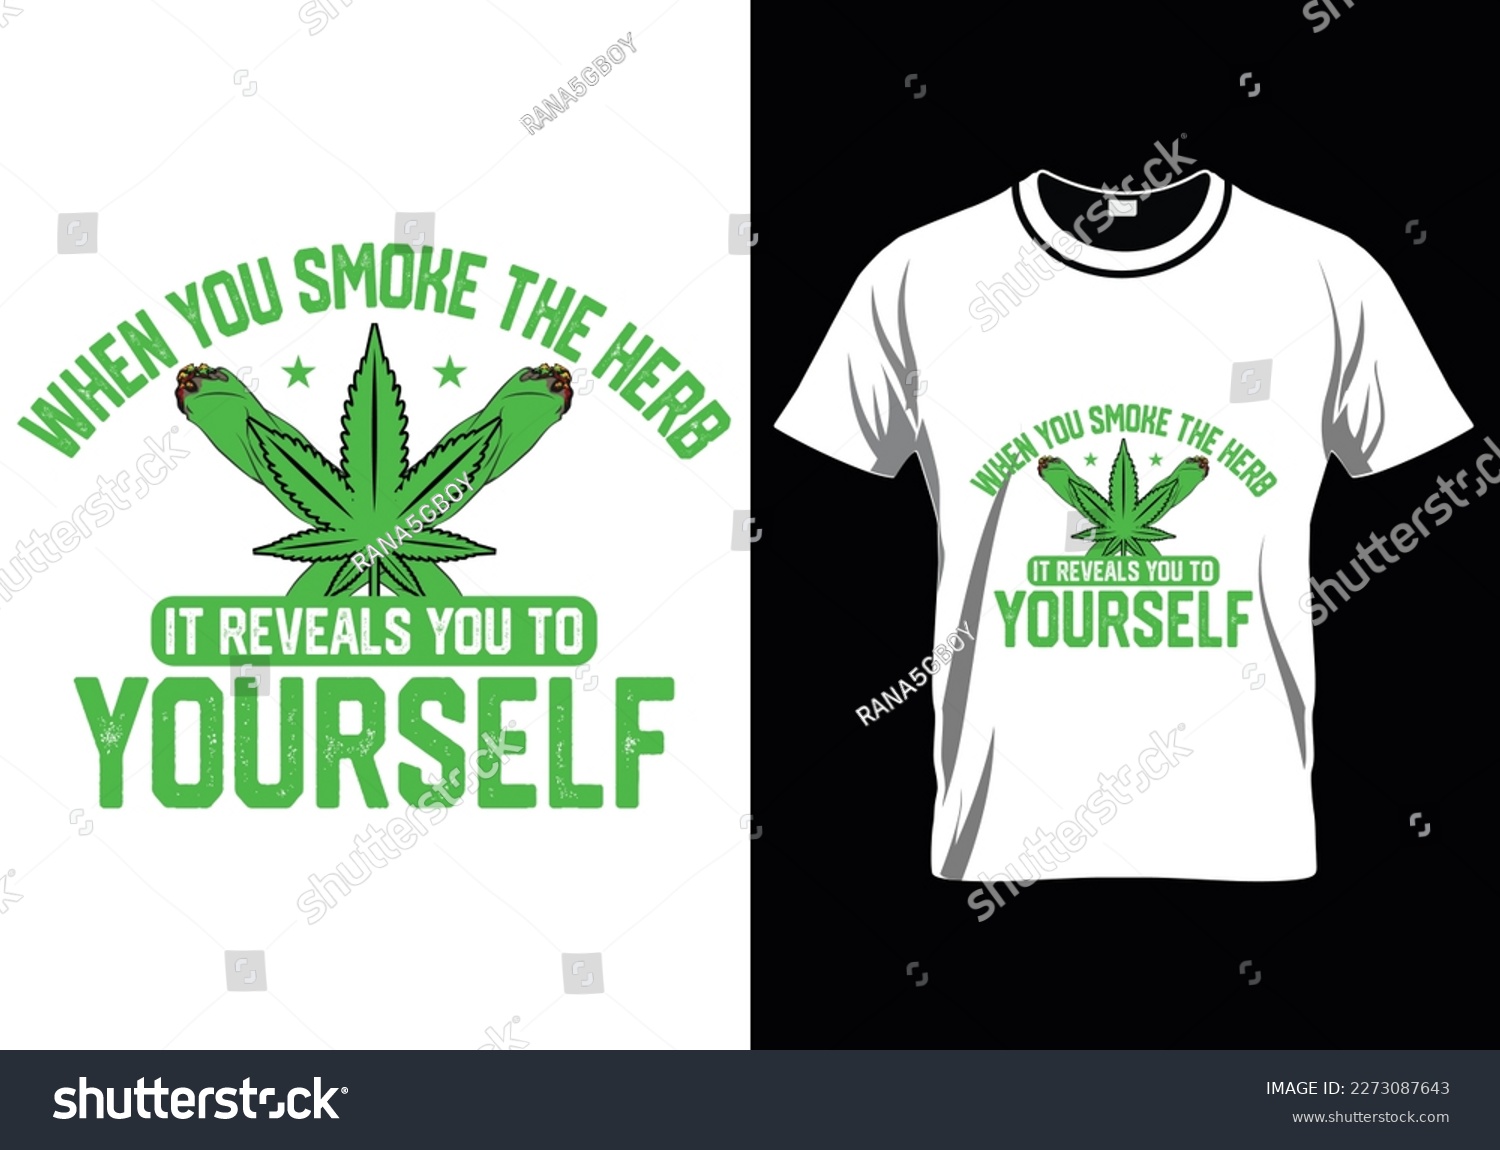 SVG of 
When You Smoke The Herb Weed T-Shirt Design svg